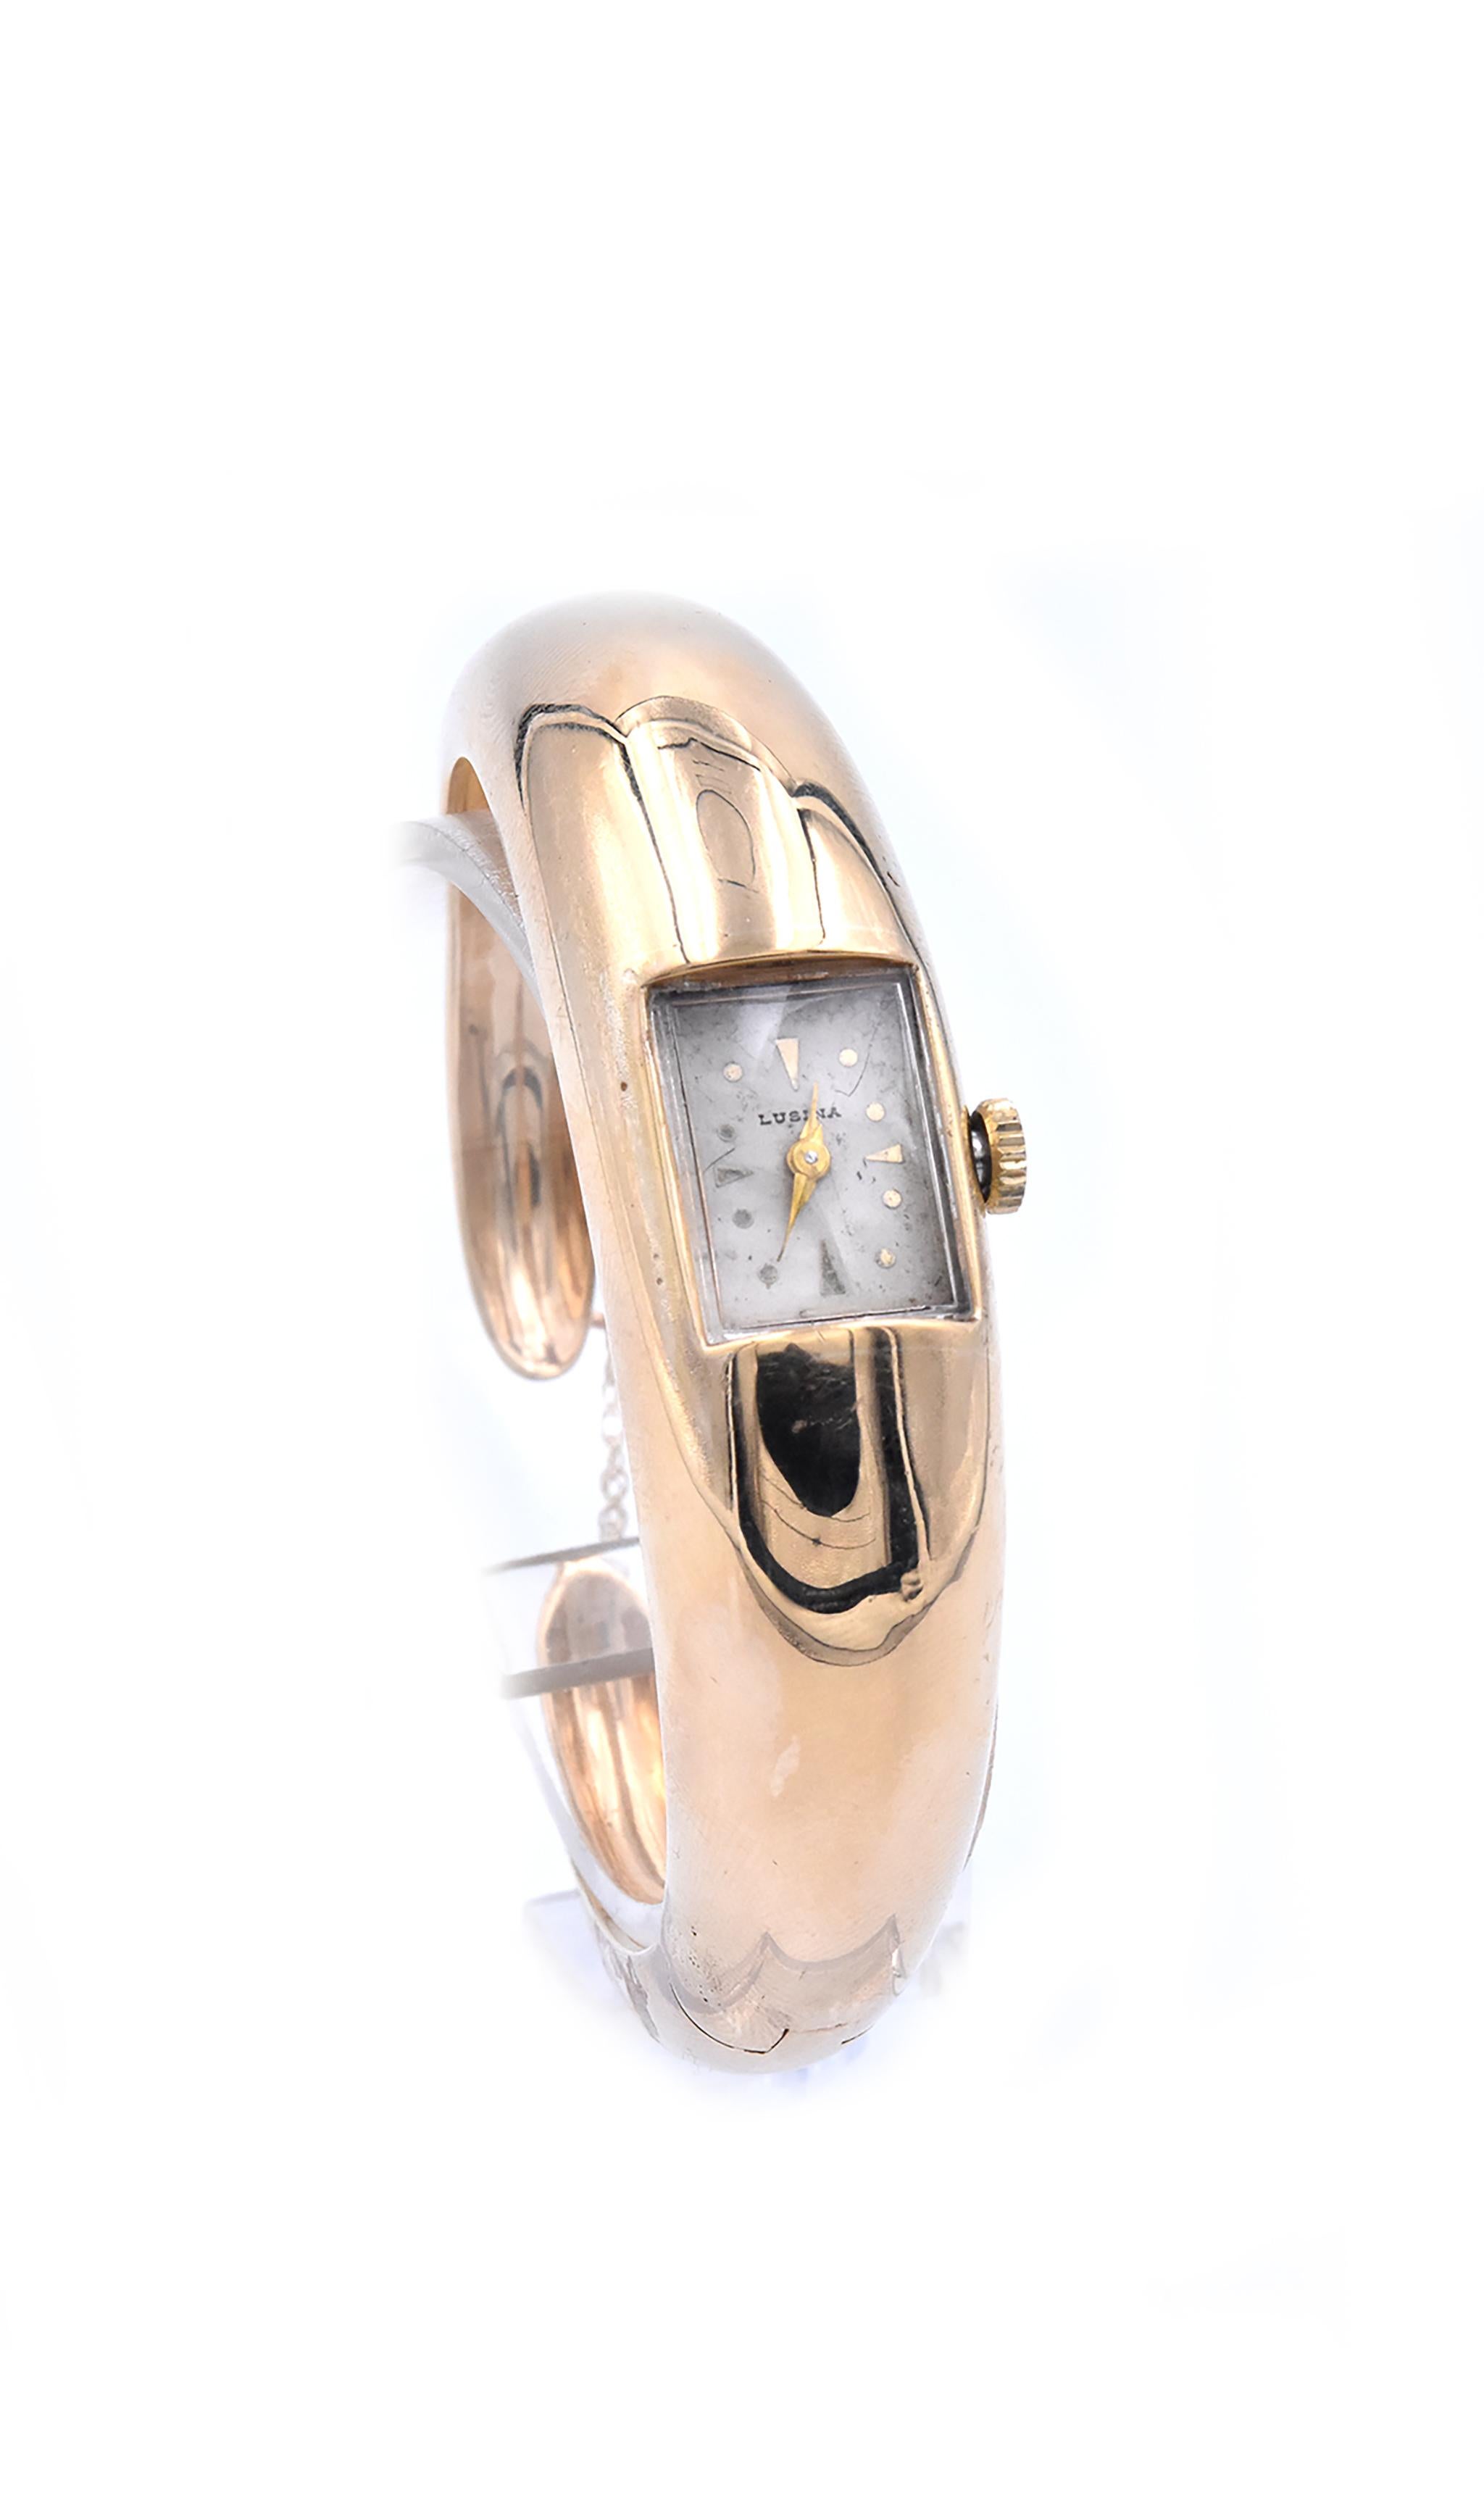 Movement: manual
Function: hours, minutes
Dial: white dot dial
17 Jewels
Measurement: cuff will fit a 6-inch wrist
Weight: 35.53 grams with movement

No original box and no paperwork.
Guaranteed to be authentic by seller.